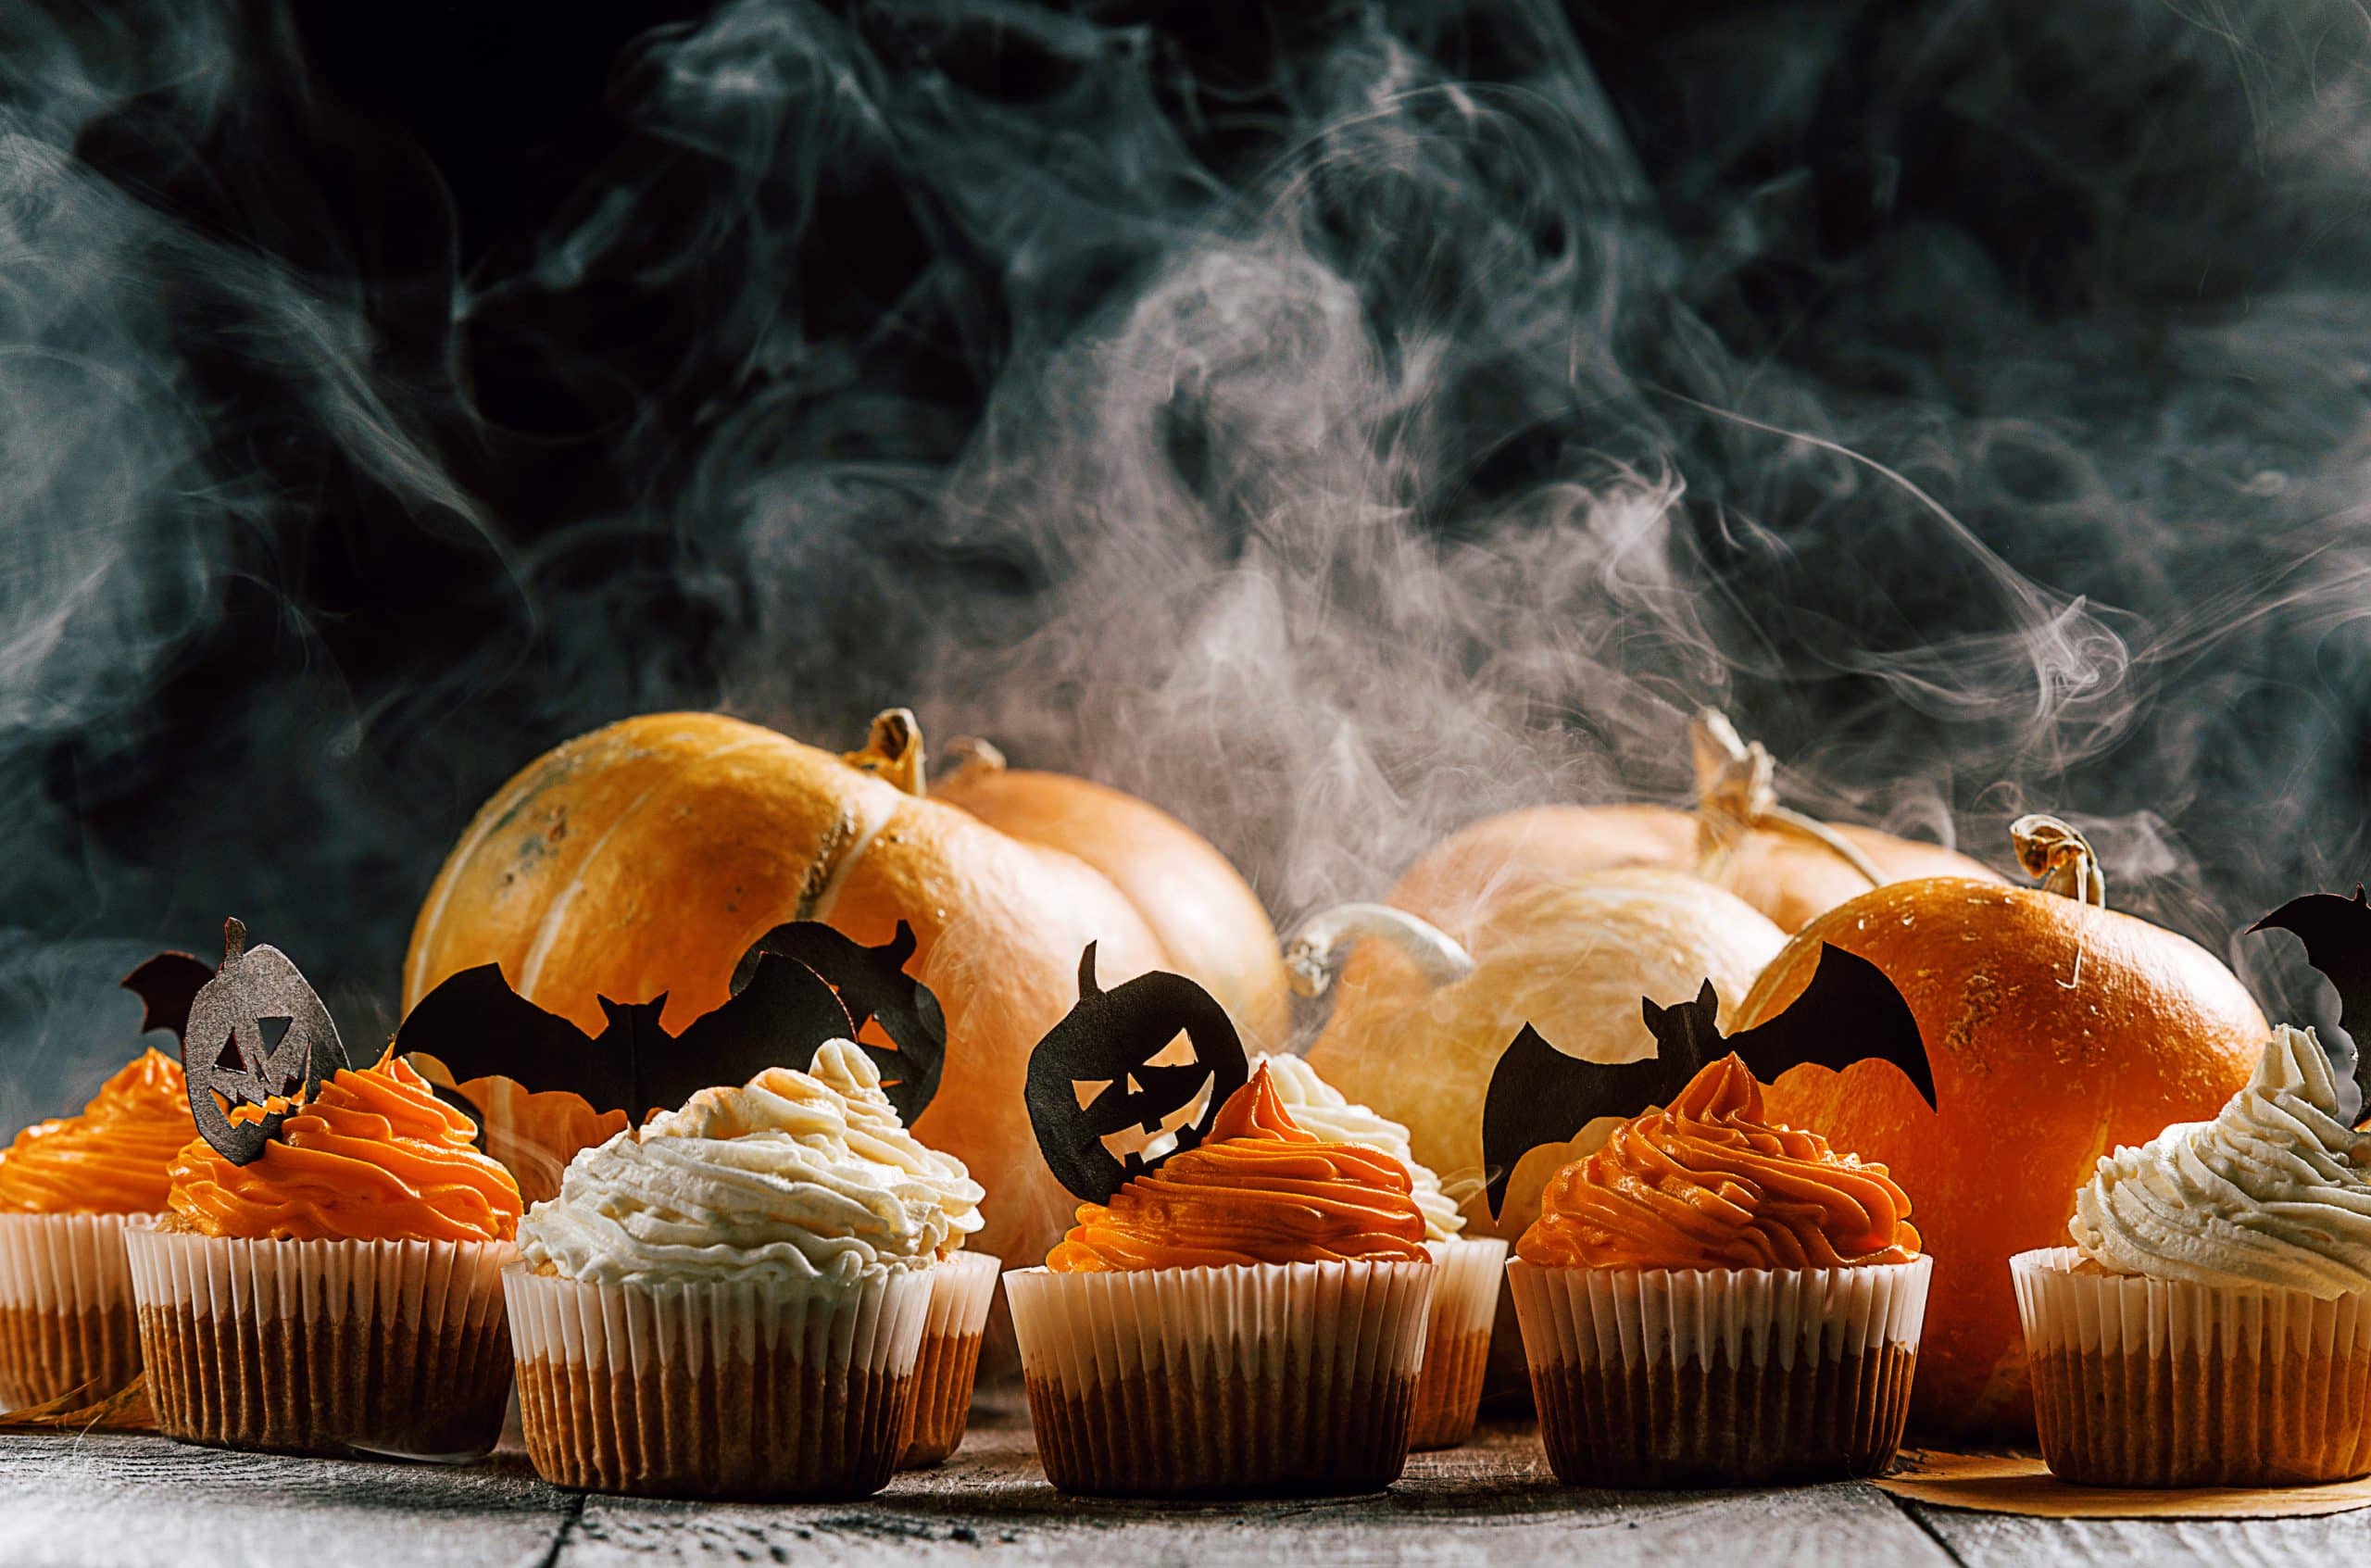 Cupcakes and pumpkins to celebrate Halloween